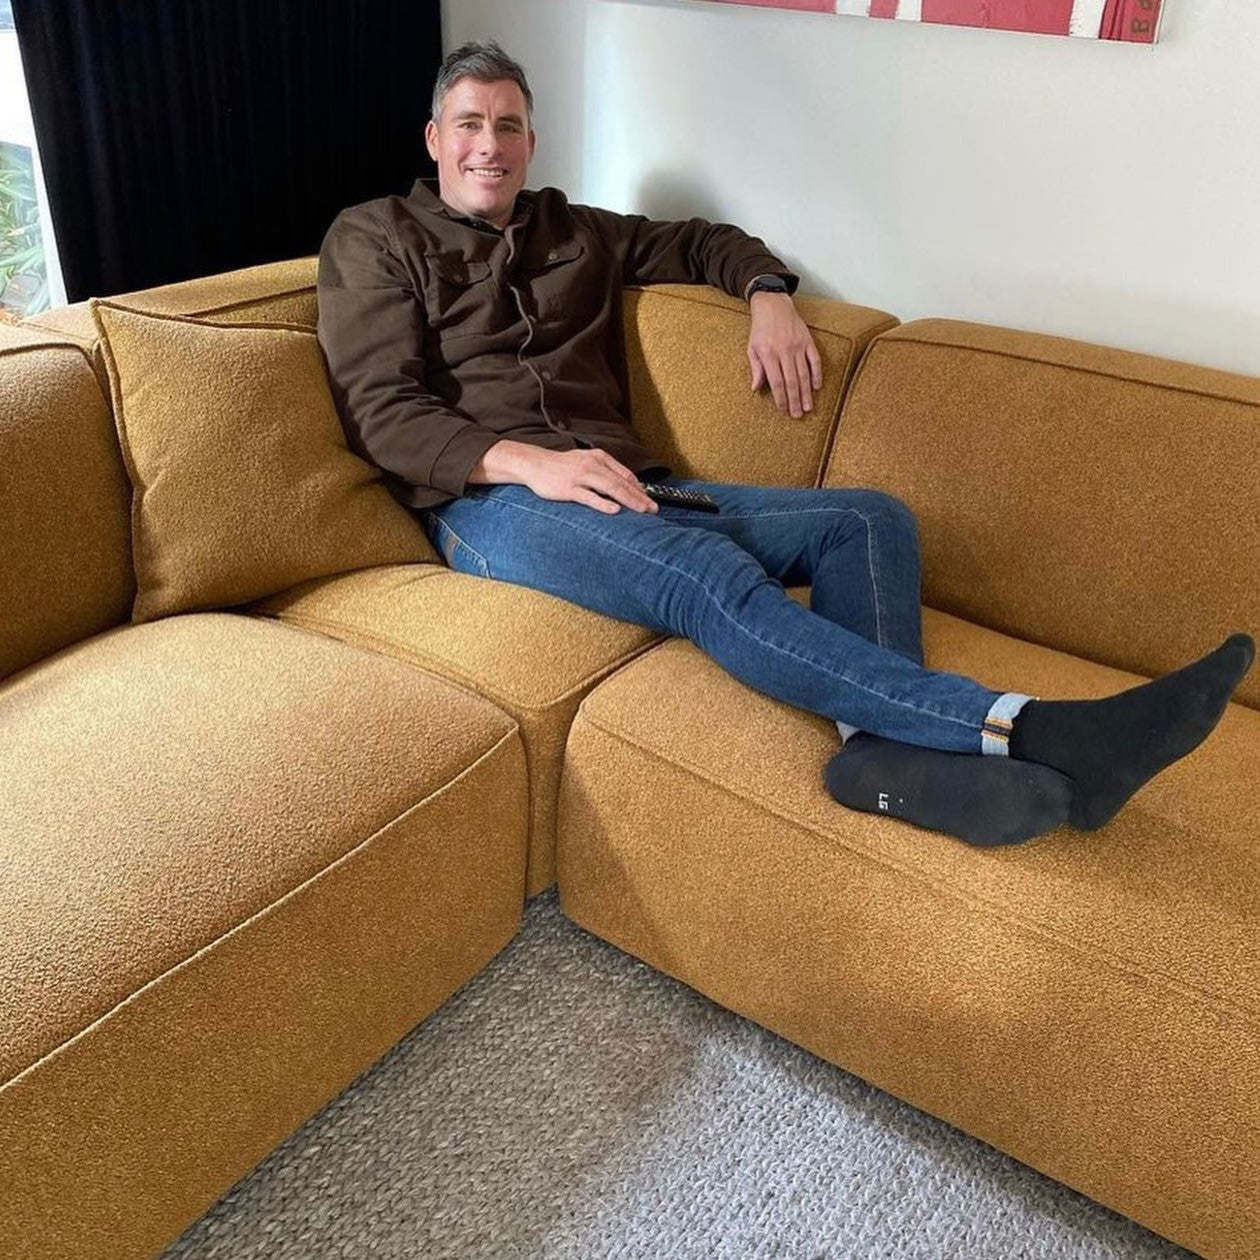 Big Easy Modular Sofa by Molmic available from Make Your House A Home, Furniture Store located in Bendigo, Victoria. Australian Made in Melbourne.